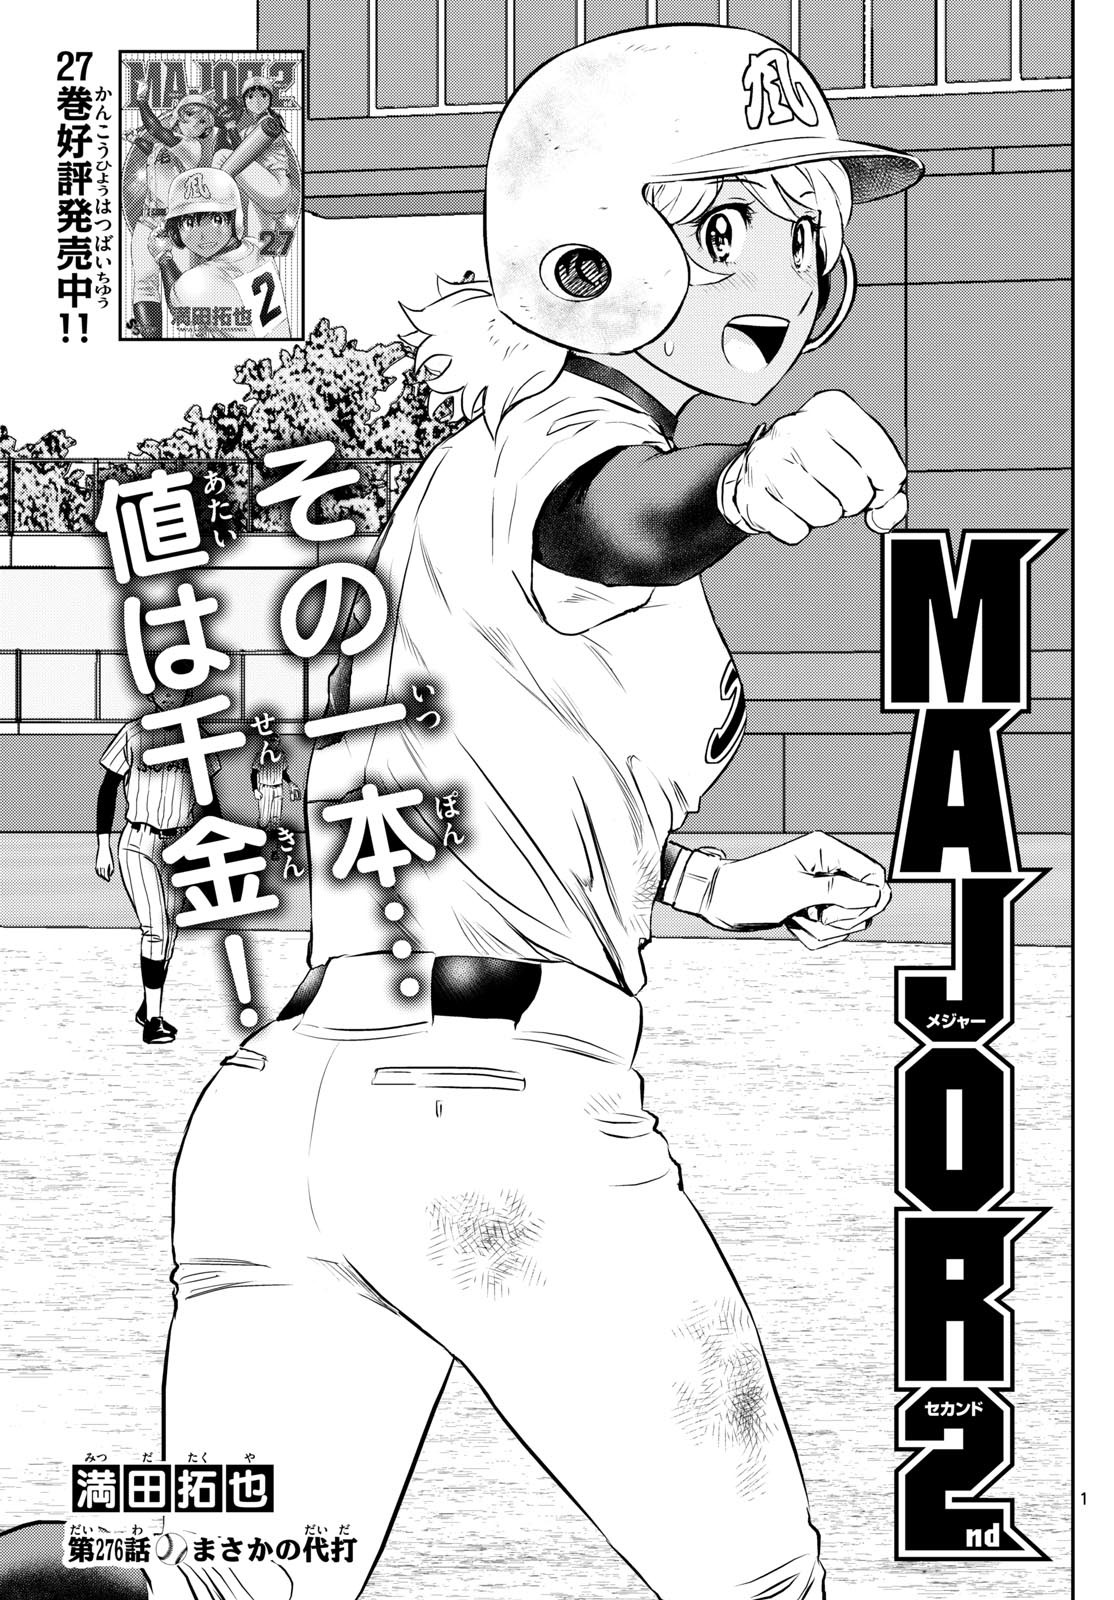 Major 2nd - メジャーセカンド - Chapter 276 - Page 1